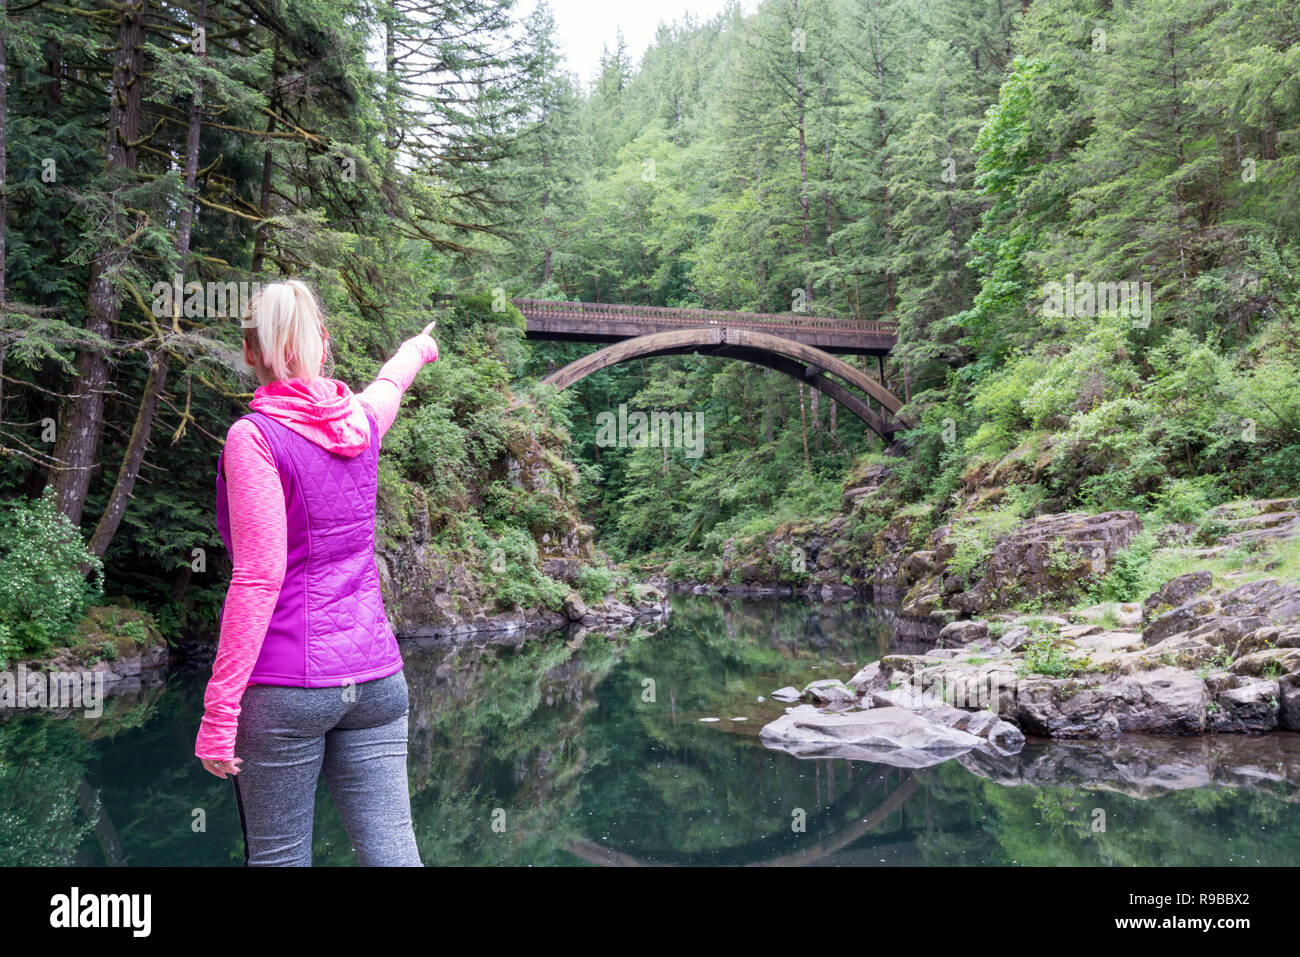 Woman Hiker from behind, Outdoors in nature, Healthy active lifestyle concept. Stock Photo